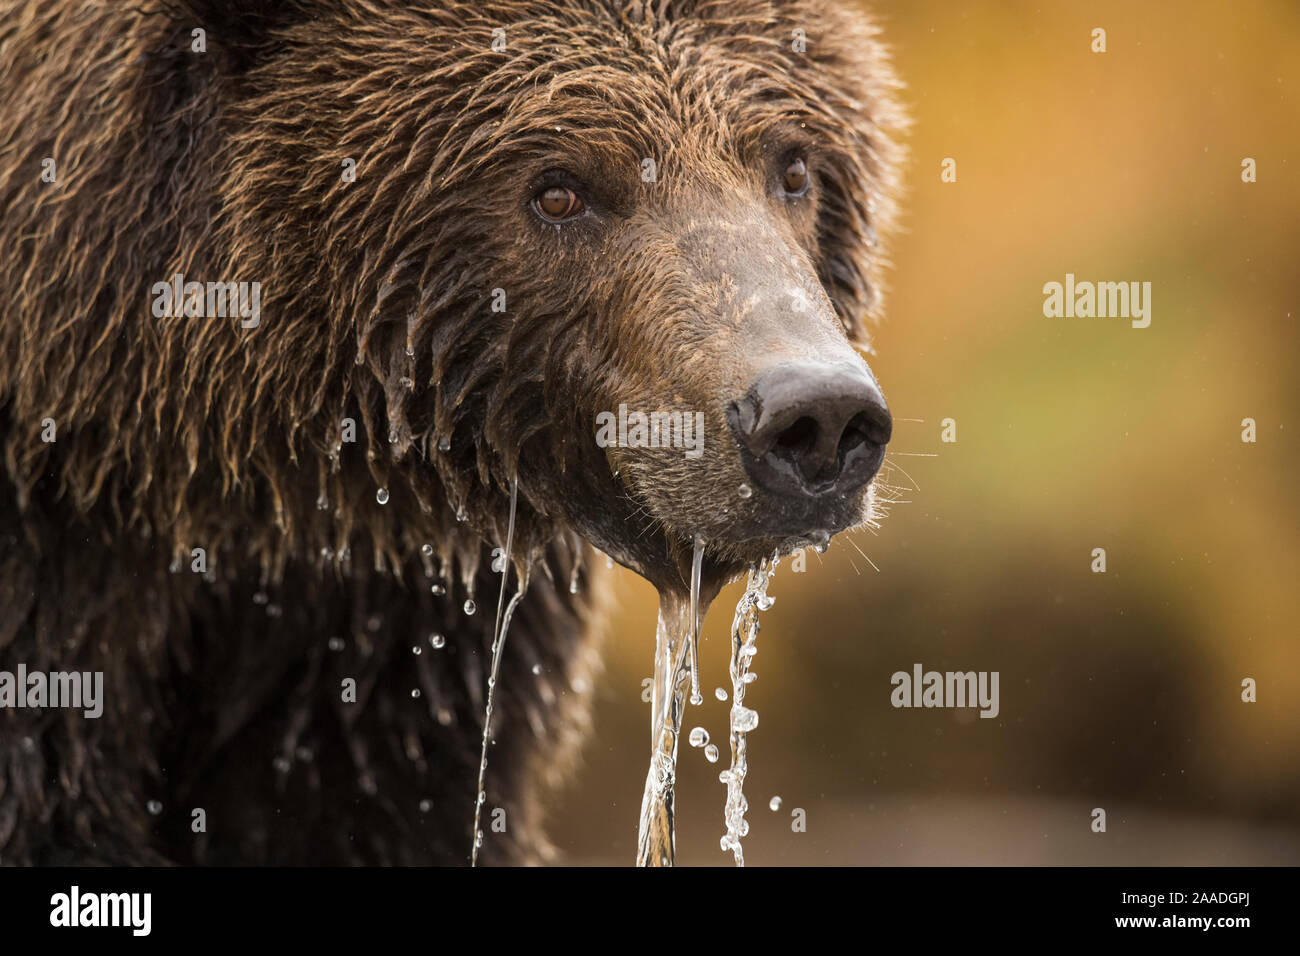 Grizzly bear (Ursus arctos) portrait, with water dripping from muzzle, Katmai, Alaska, USA Stock Photo